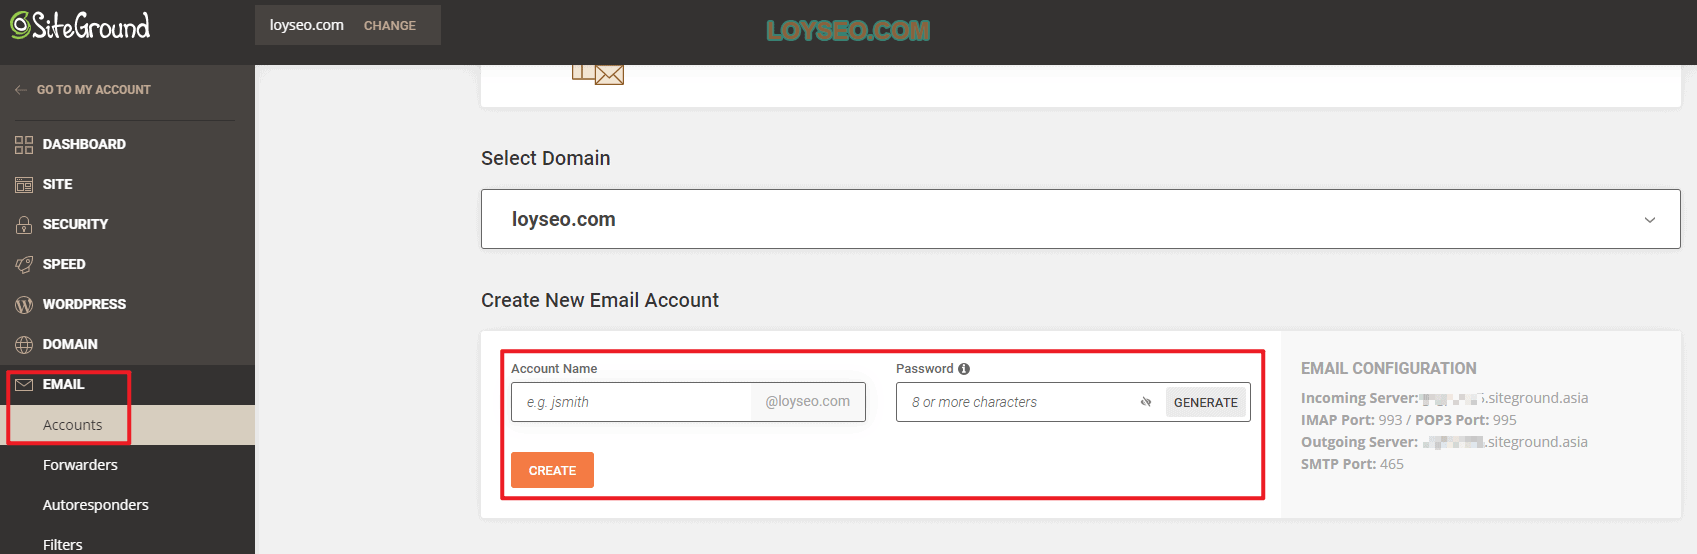 siteground email account